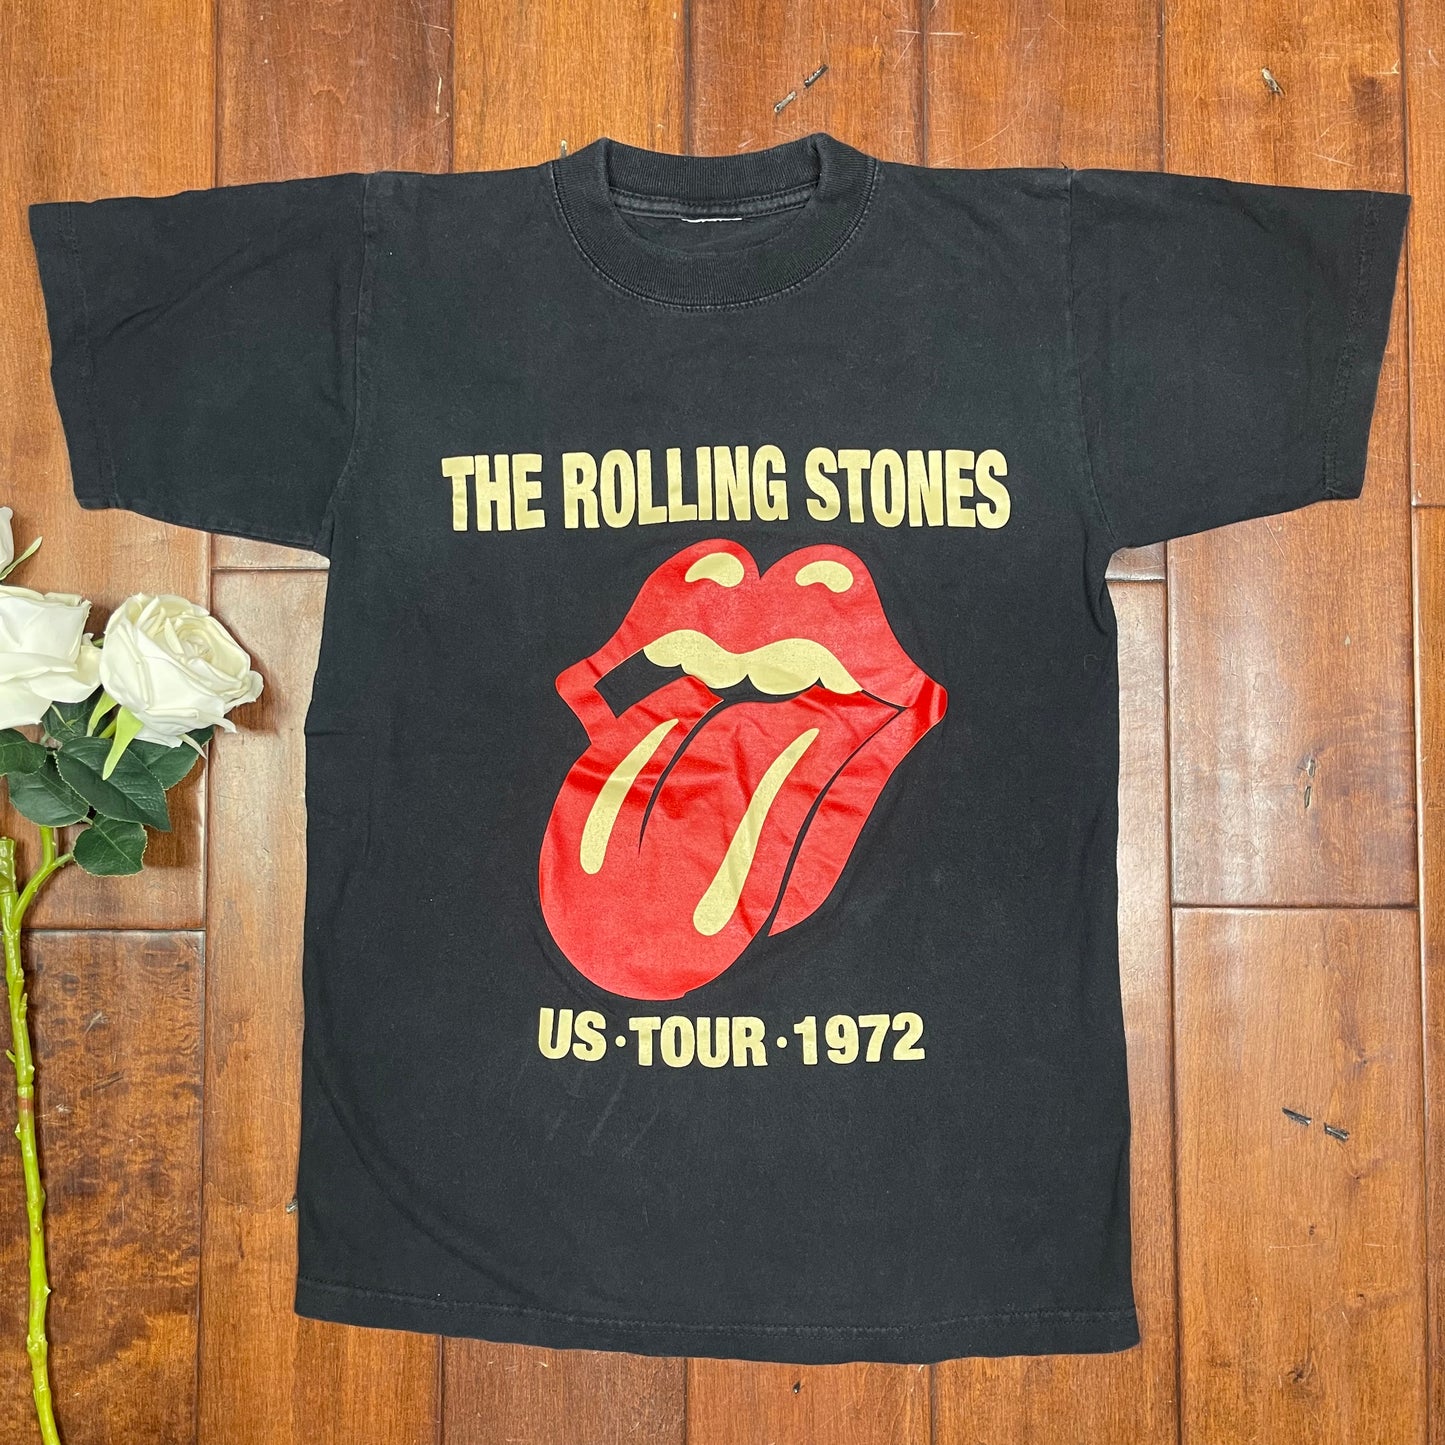 THRIFTED ROLLING STONES T-SHIRT